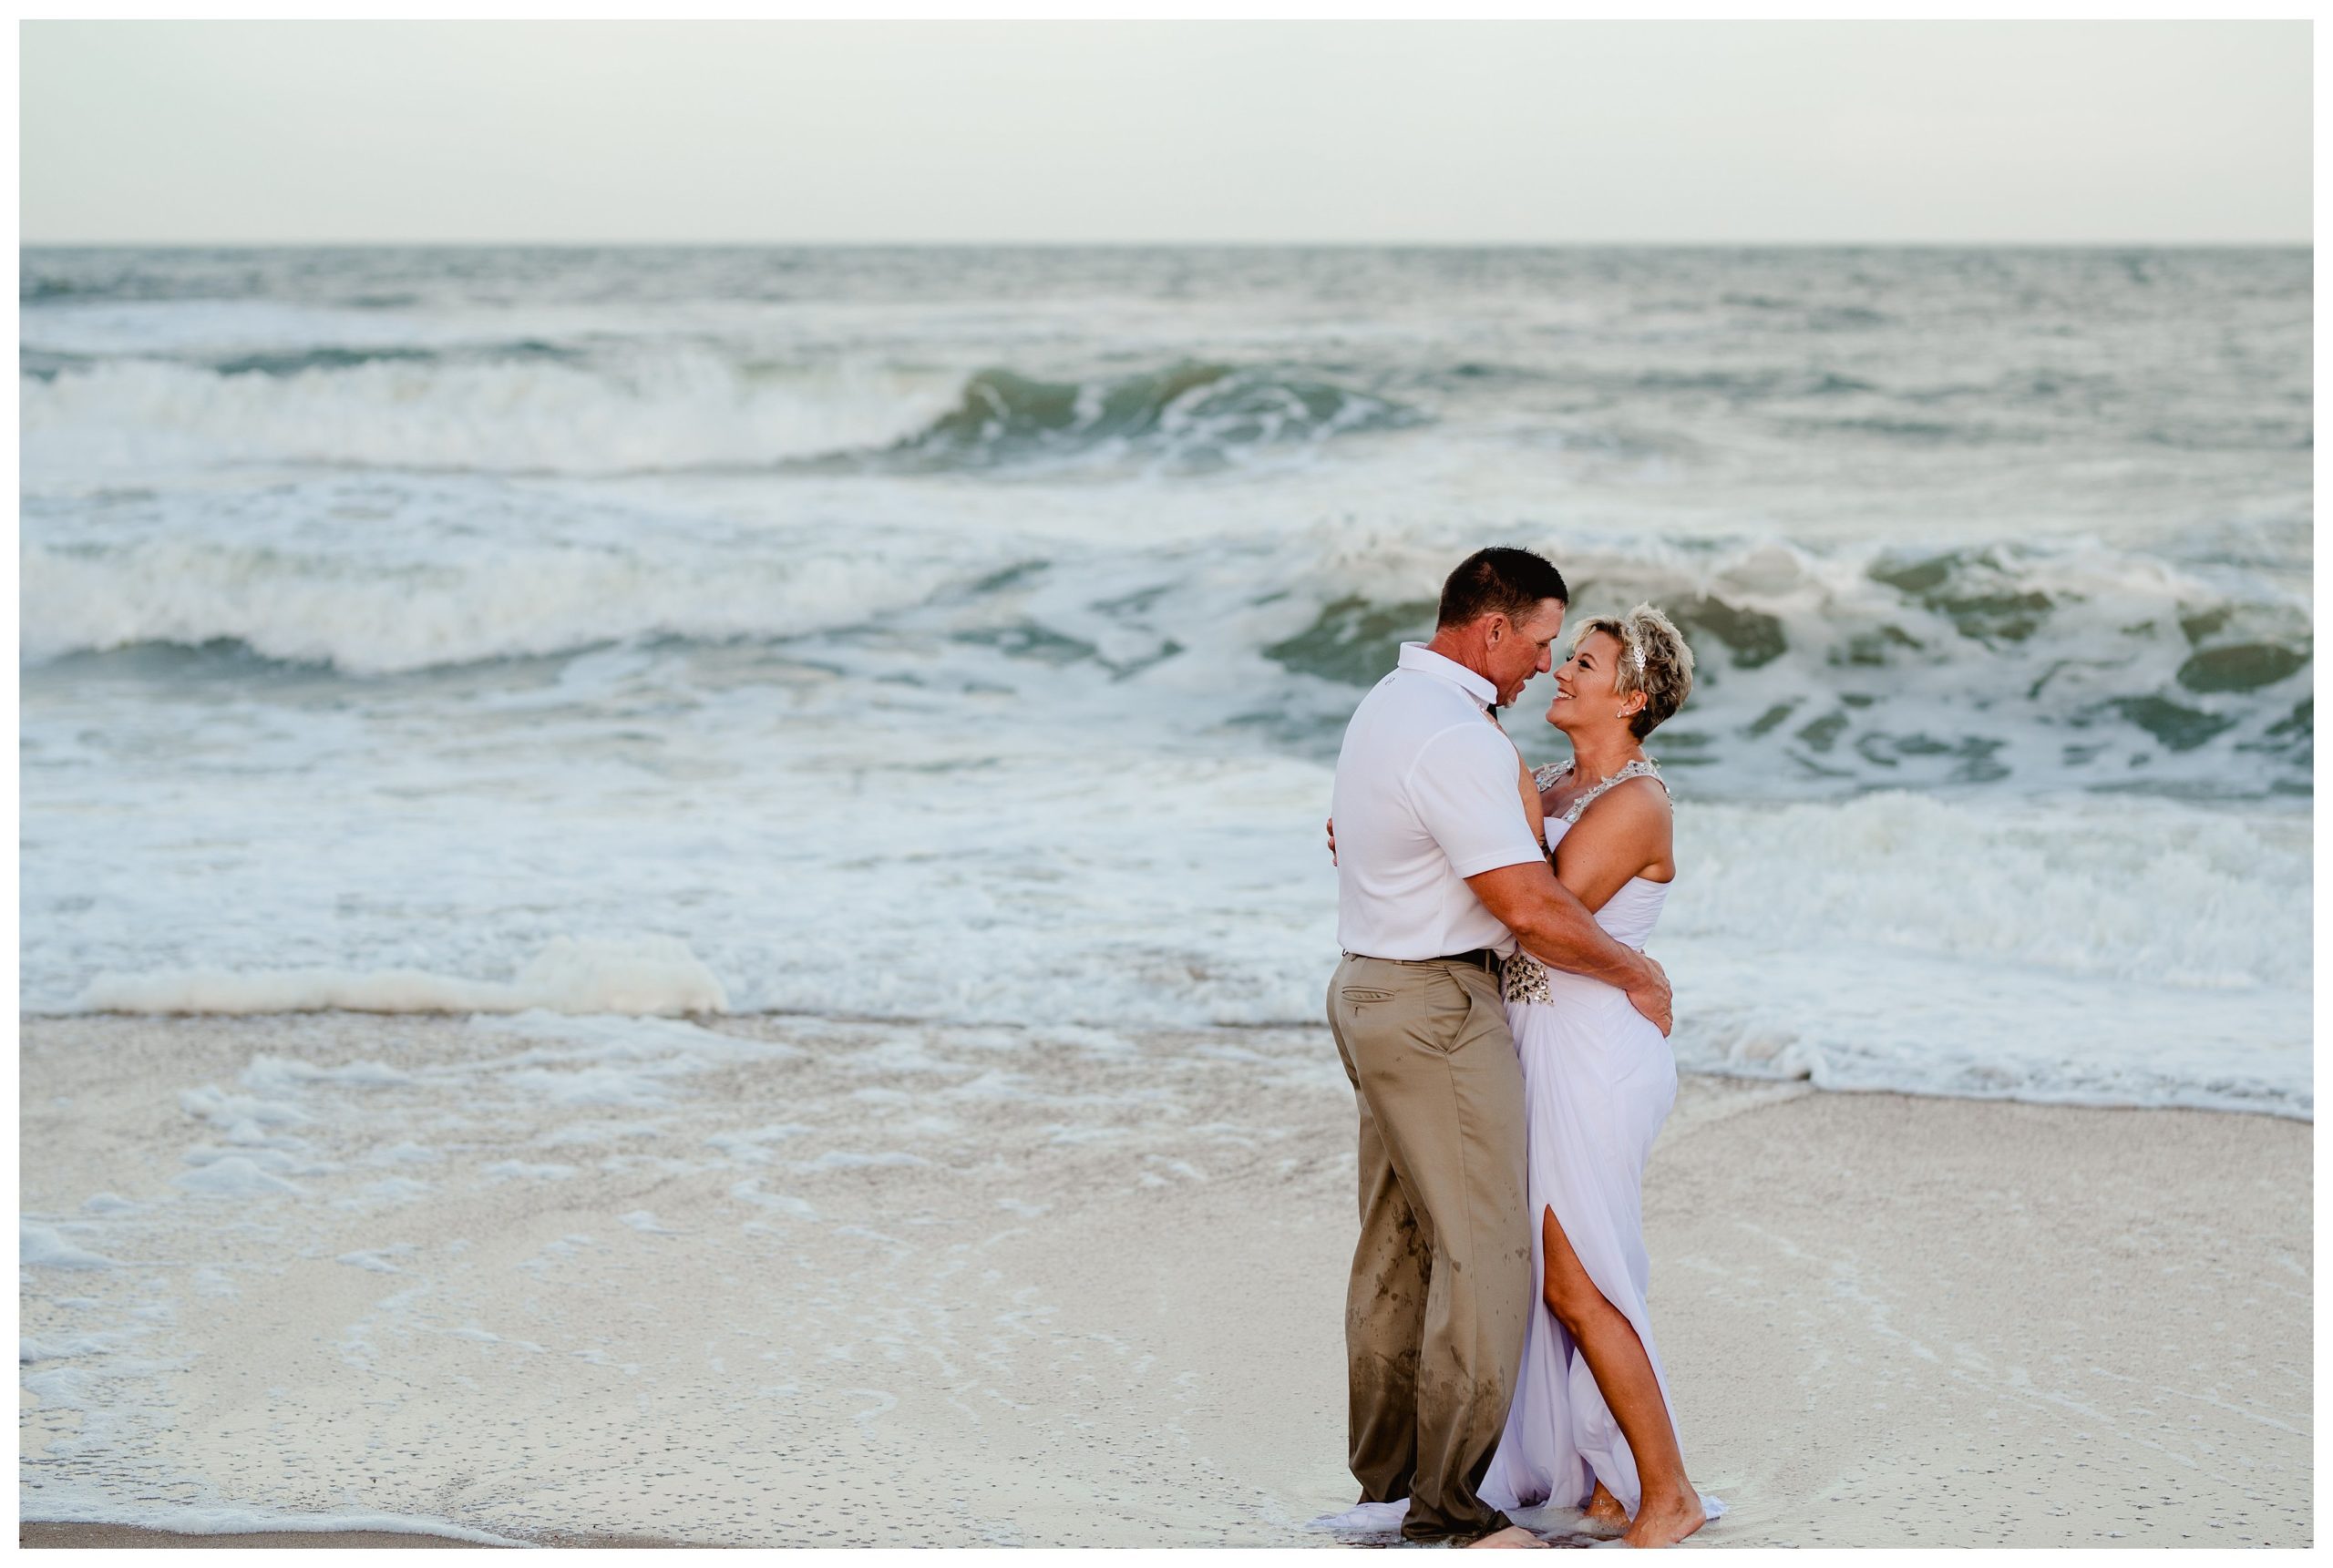 St. Augustine beach wedding couple takes photos along the water with professional candid photographer.